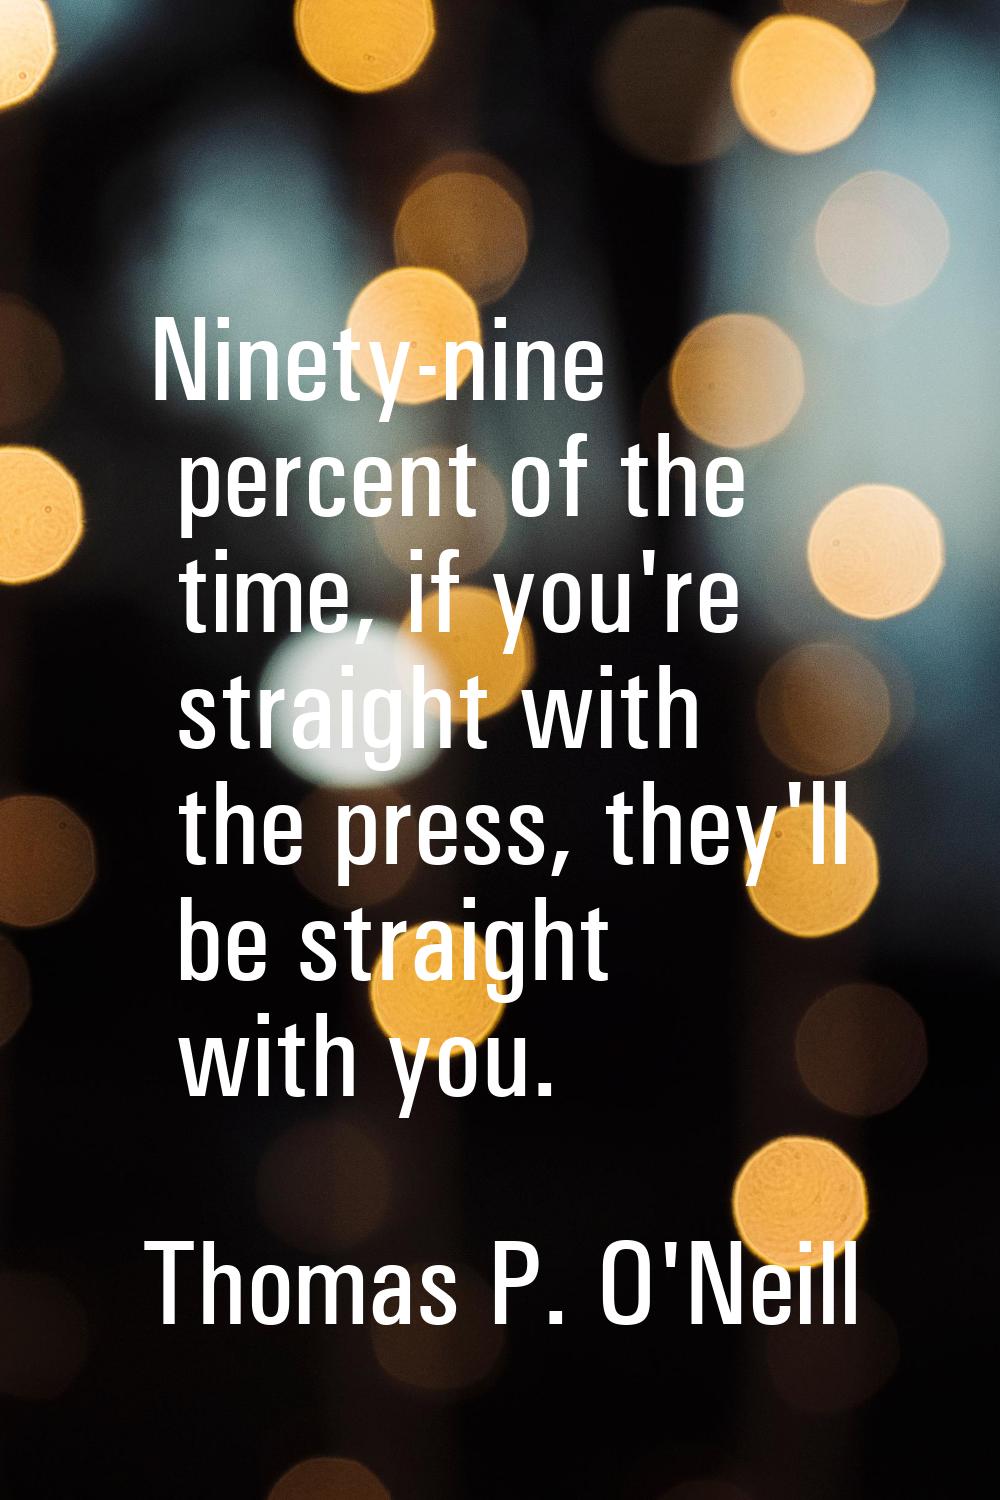 Ninety-nine percent of the time, if you're straight with the press, they'll be straight with you.